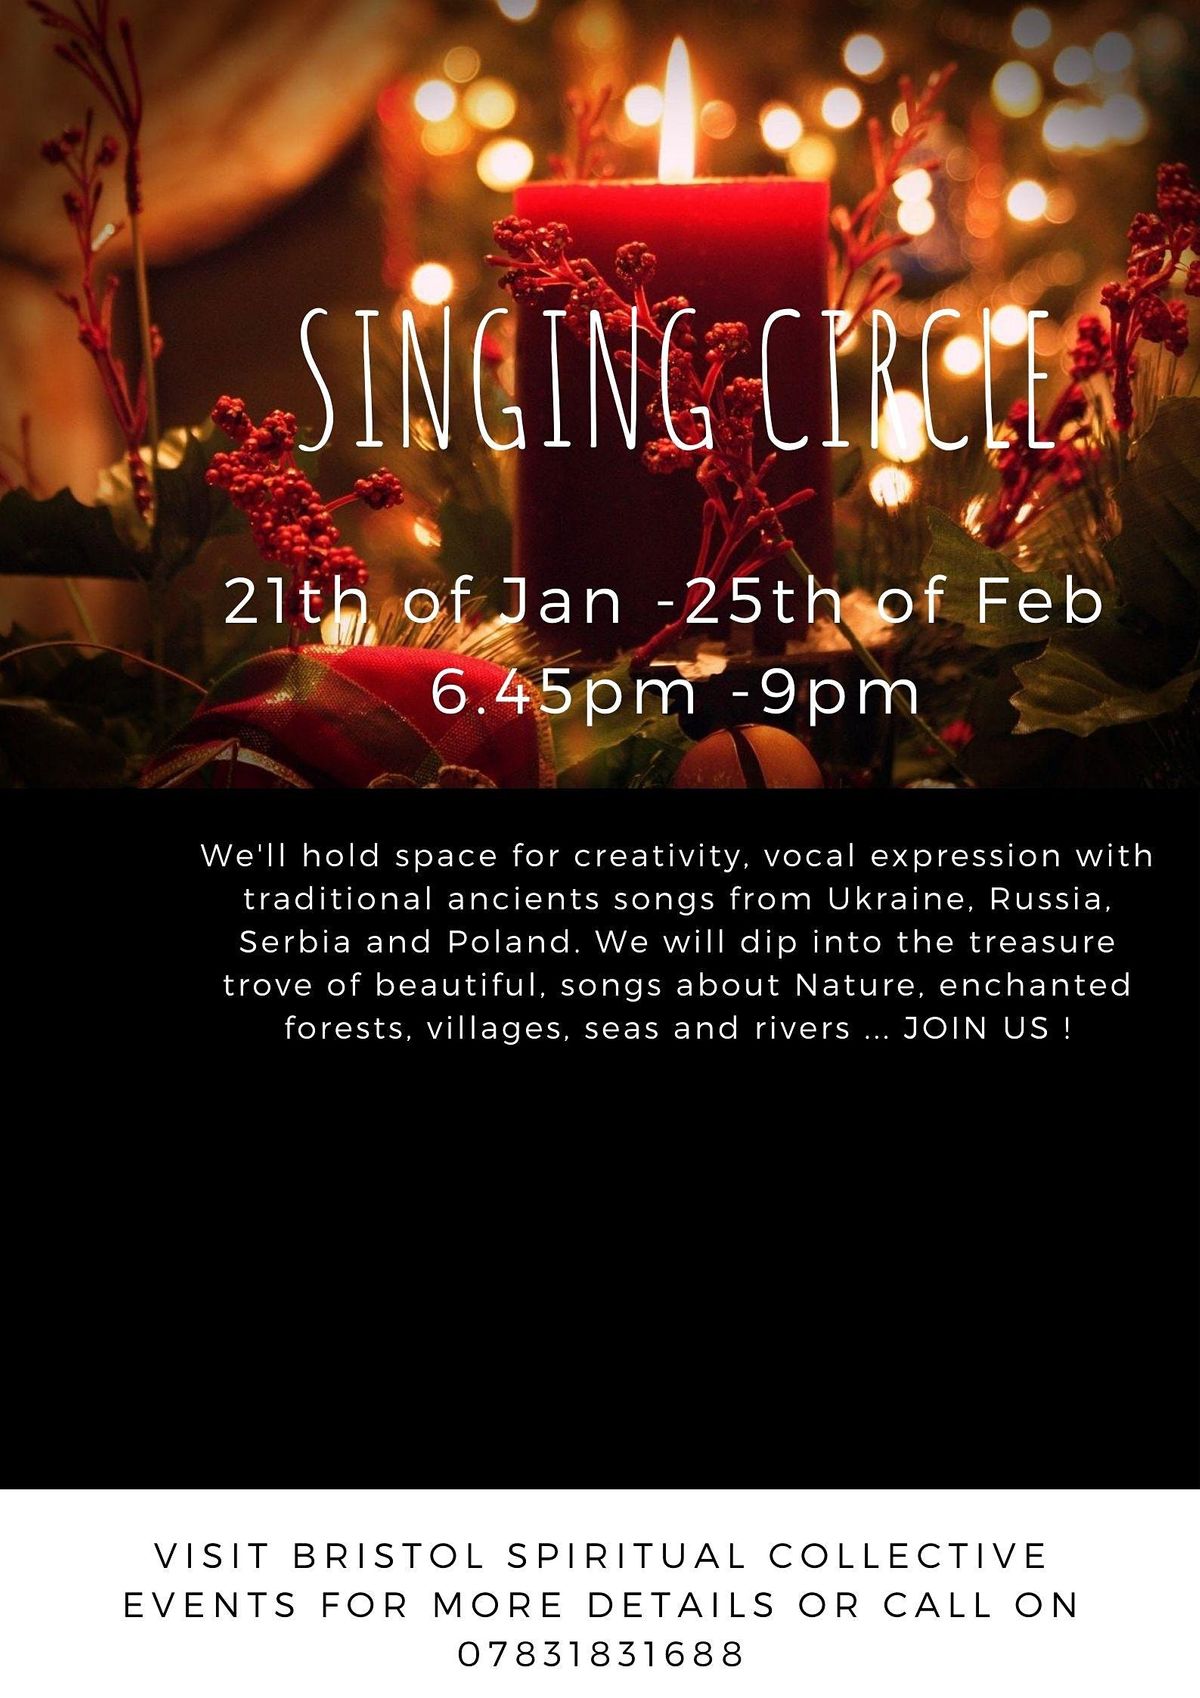 Signing circle with soulful carols  from Eastern Europe + sound bath